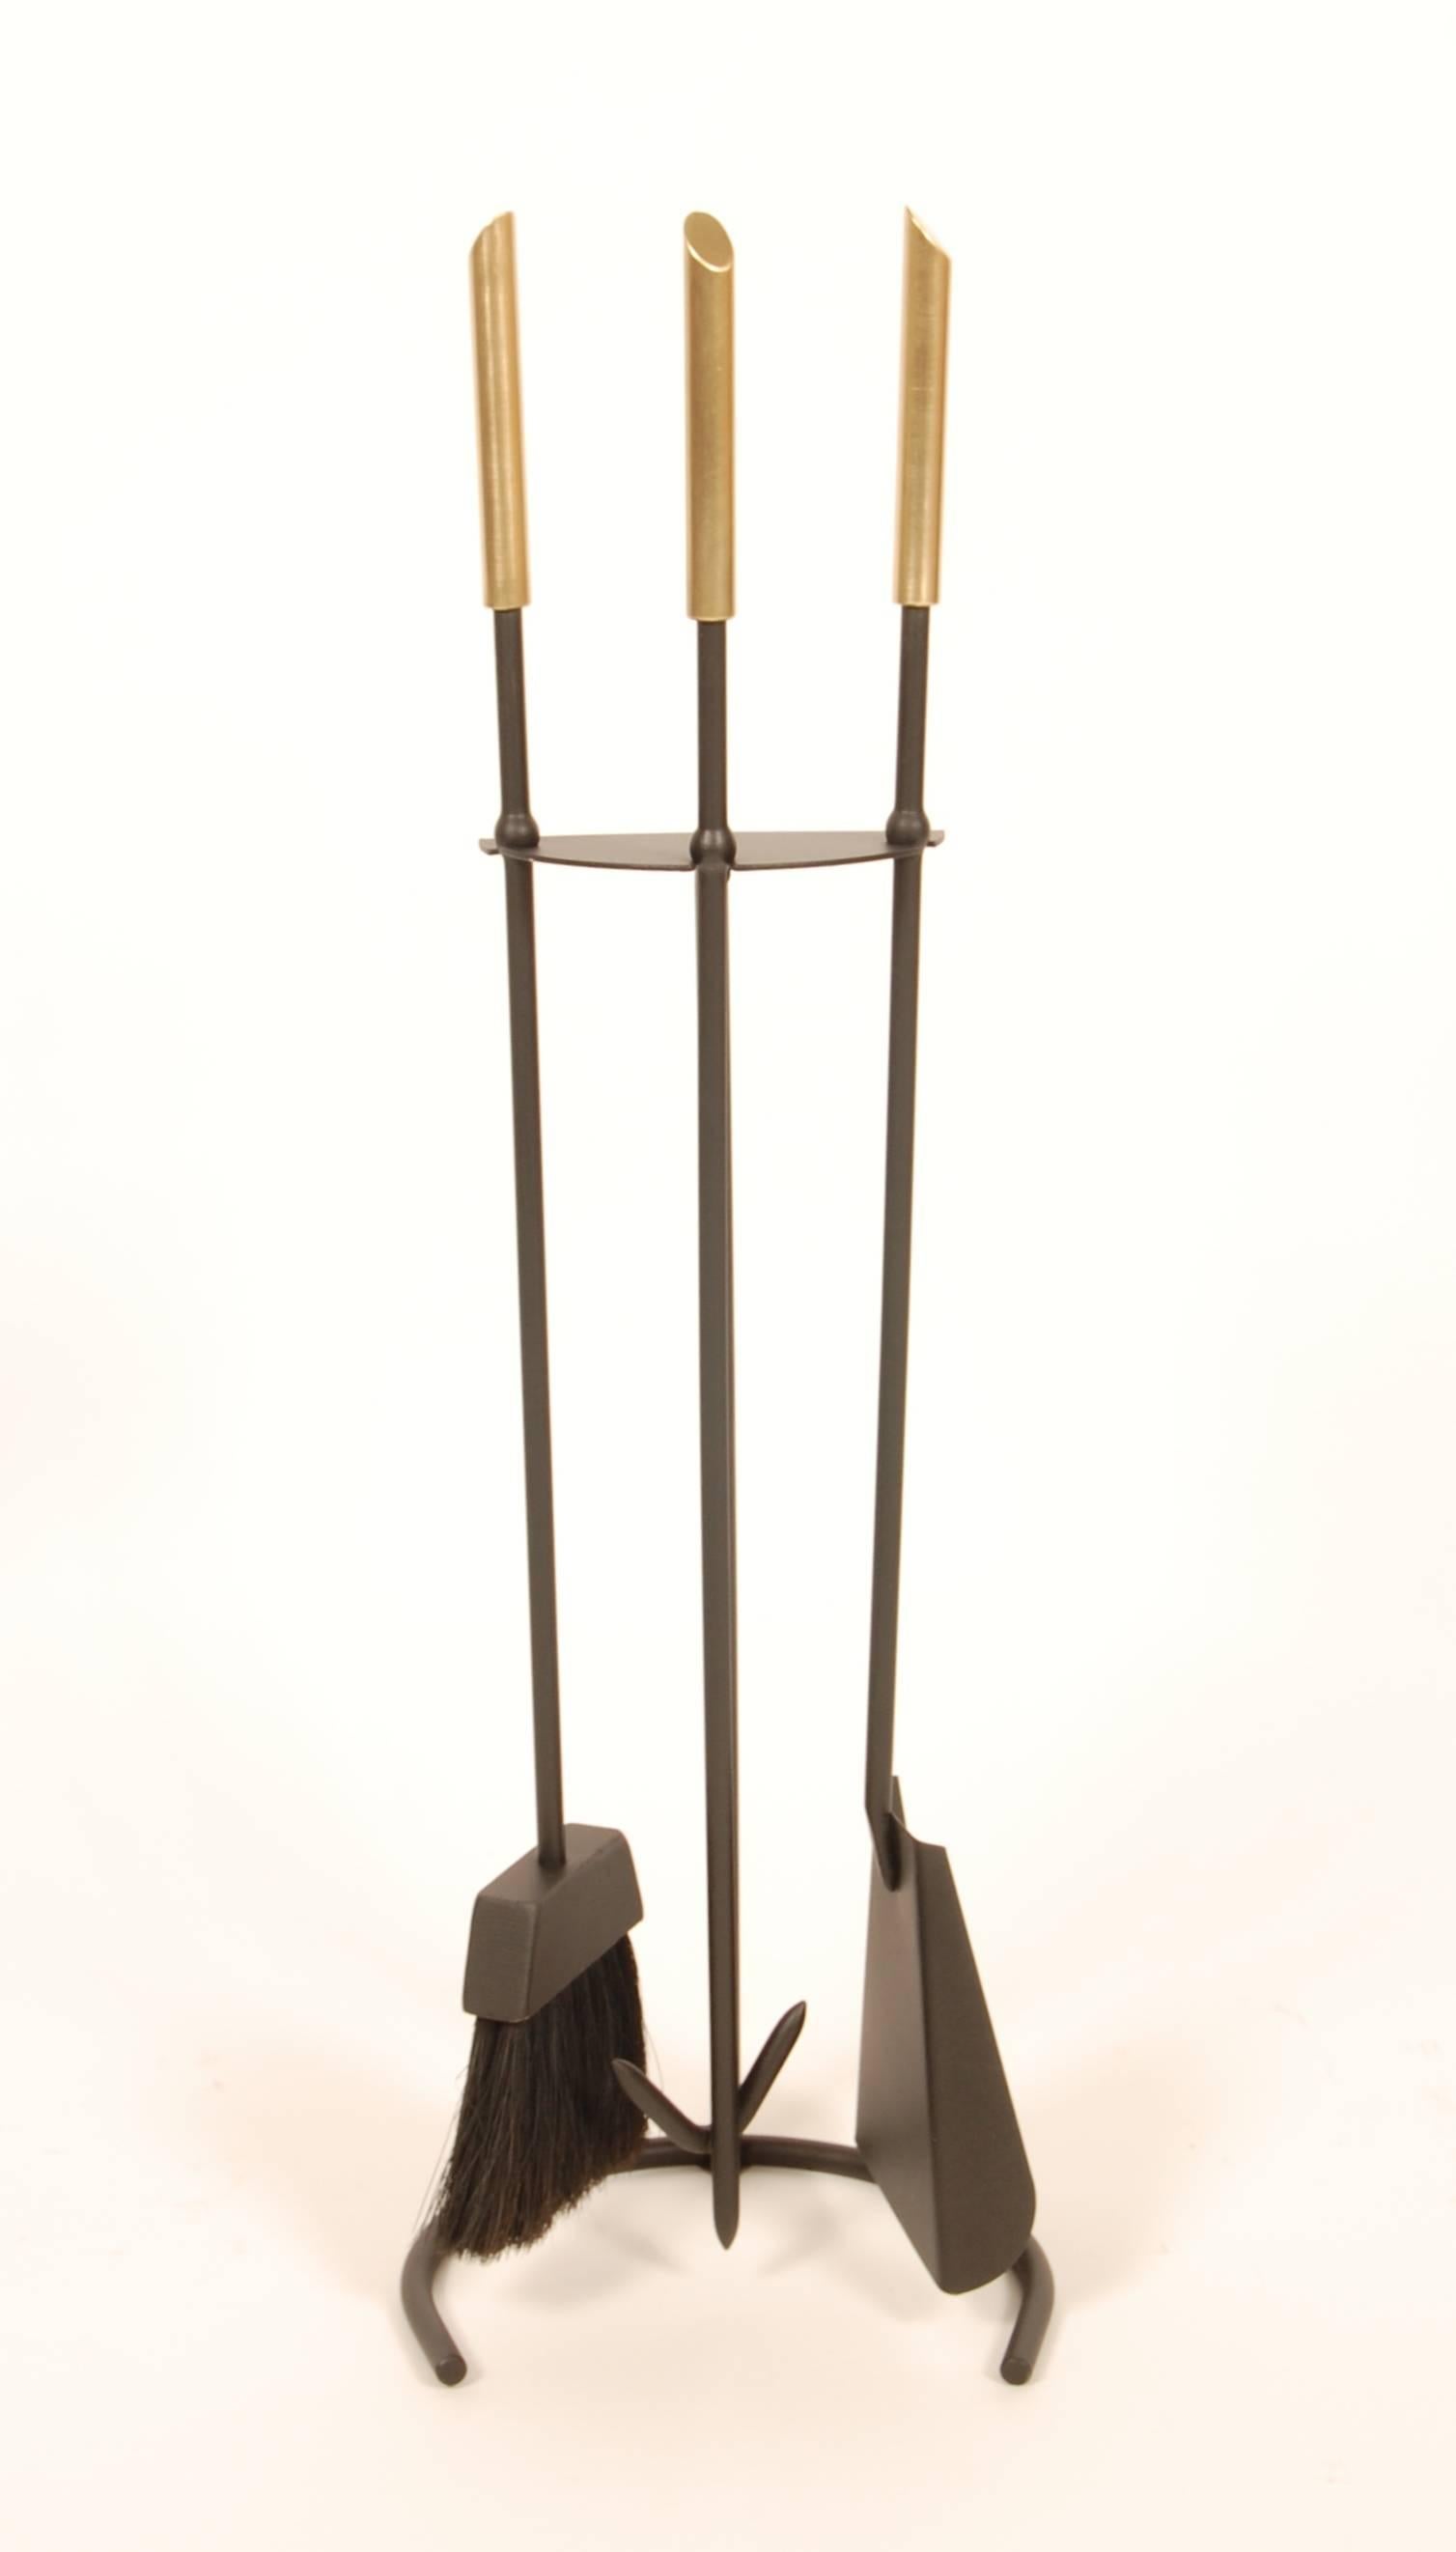 1950s modernist fire tools with a painted round stock wrought iron frame and polished brass handles. The solid brass cylindrical handles have a 45 degree taper at their ends and the iron frame has a half circle form base and utensil holder. These